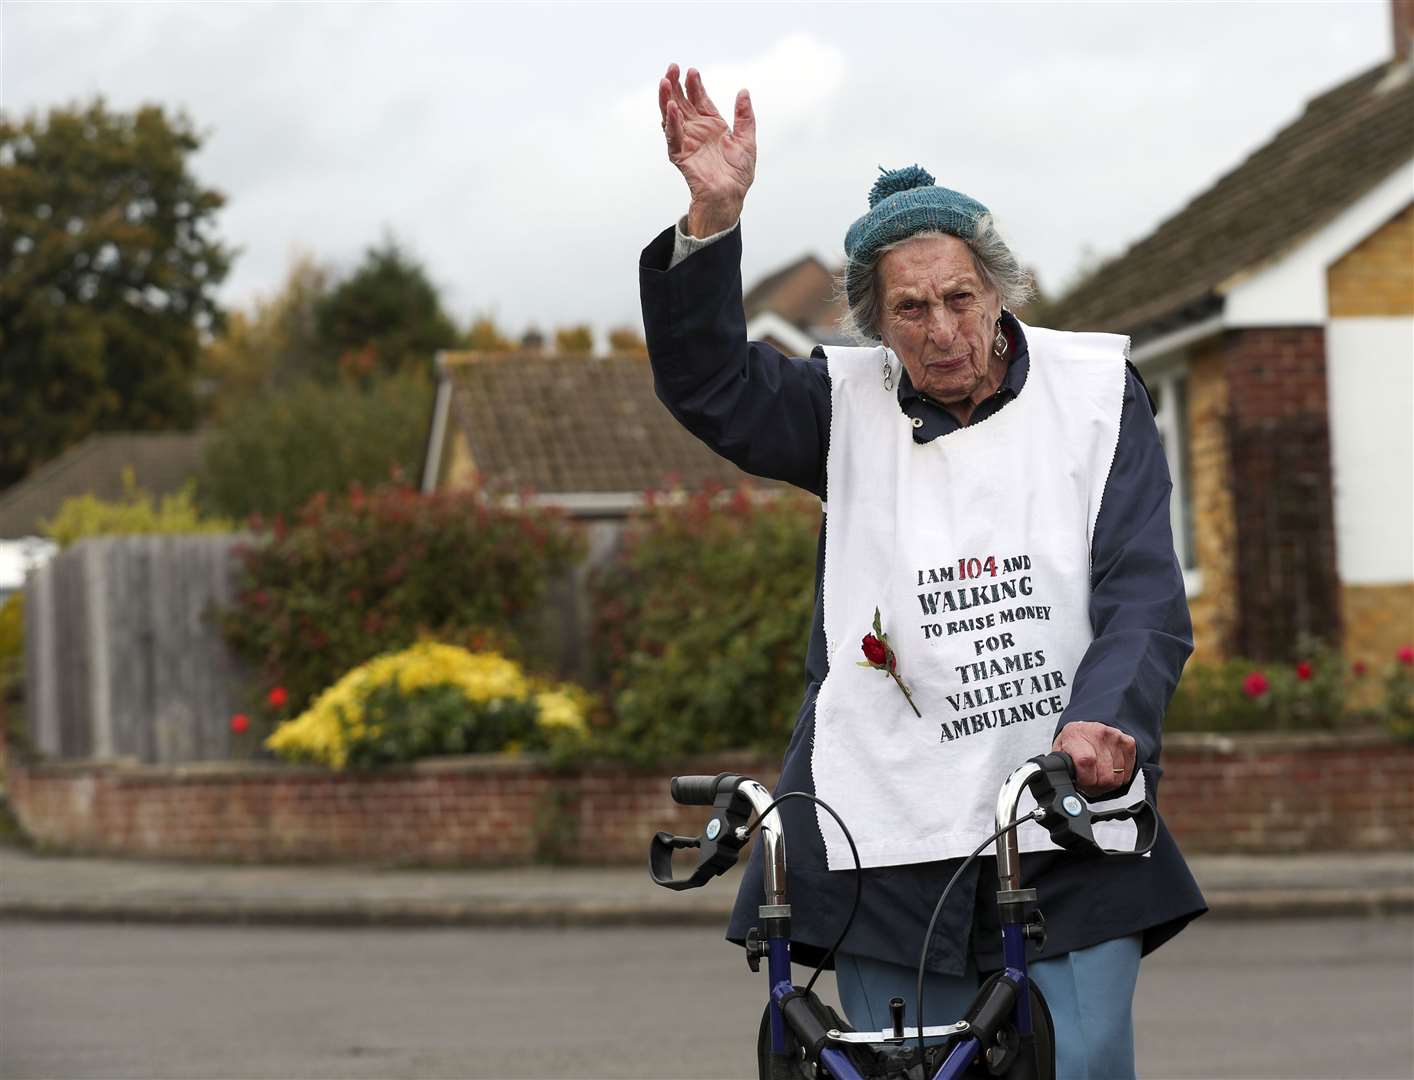 Ruth Saunders is walking a marathon to raise funds for Thames Valley Air Ambulance (Steve Parsons/PA)